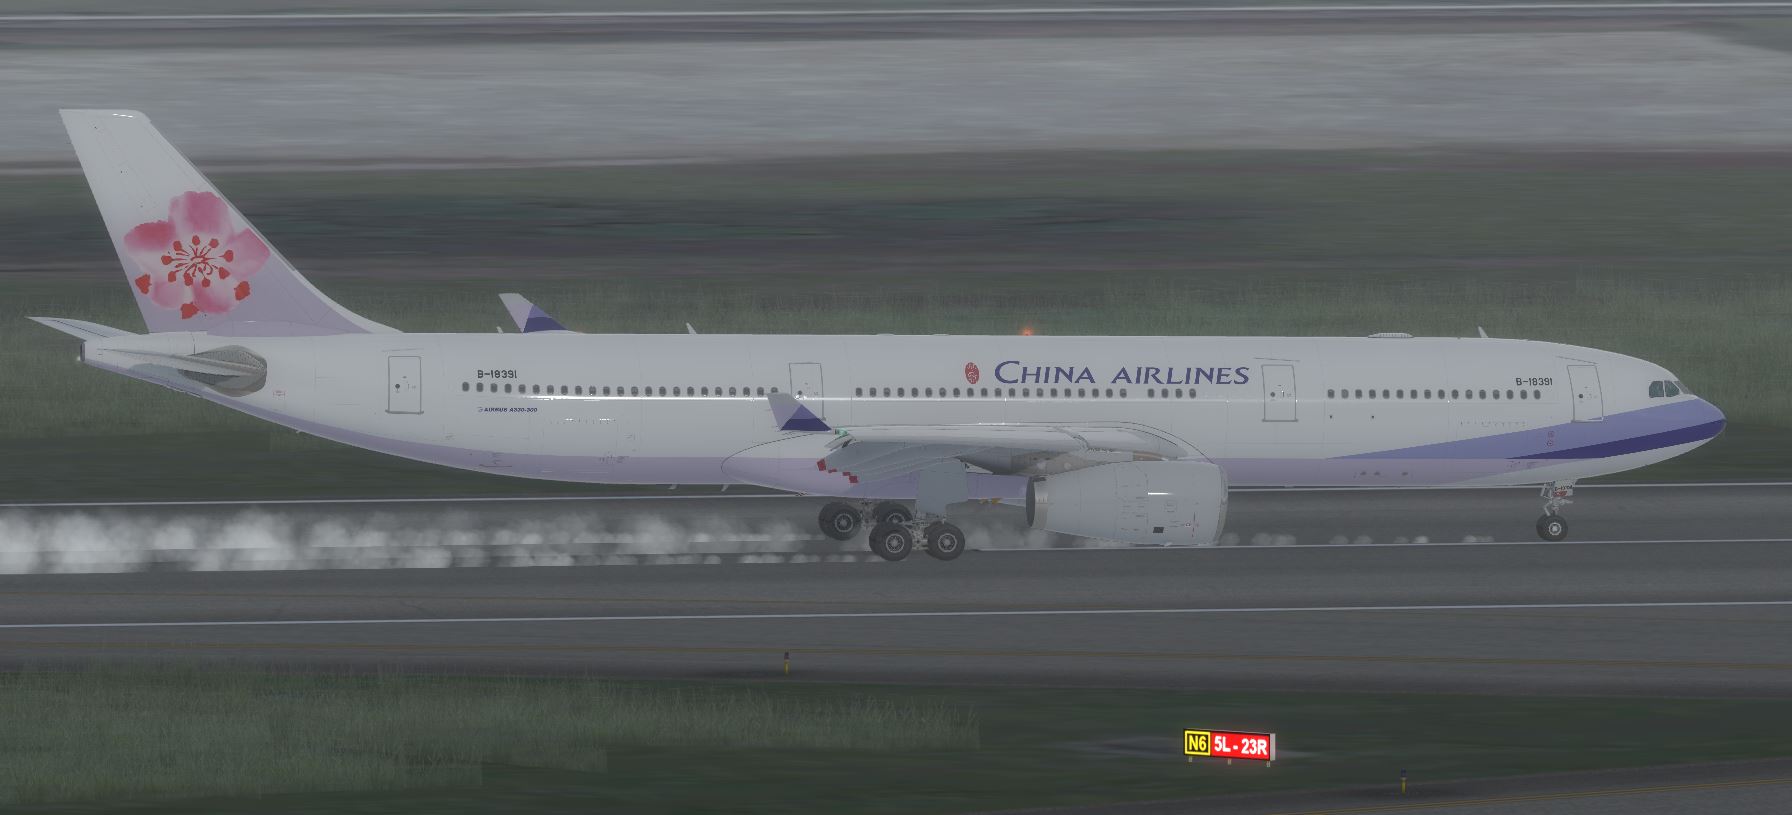 AS A330 ChinaAirline-2452 